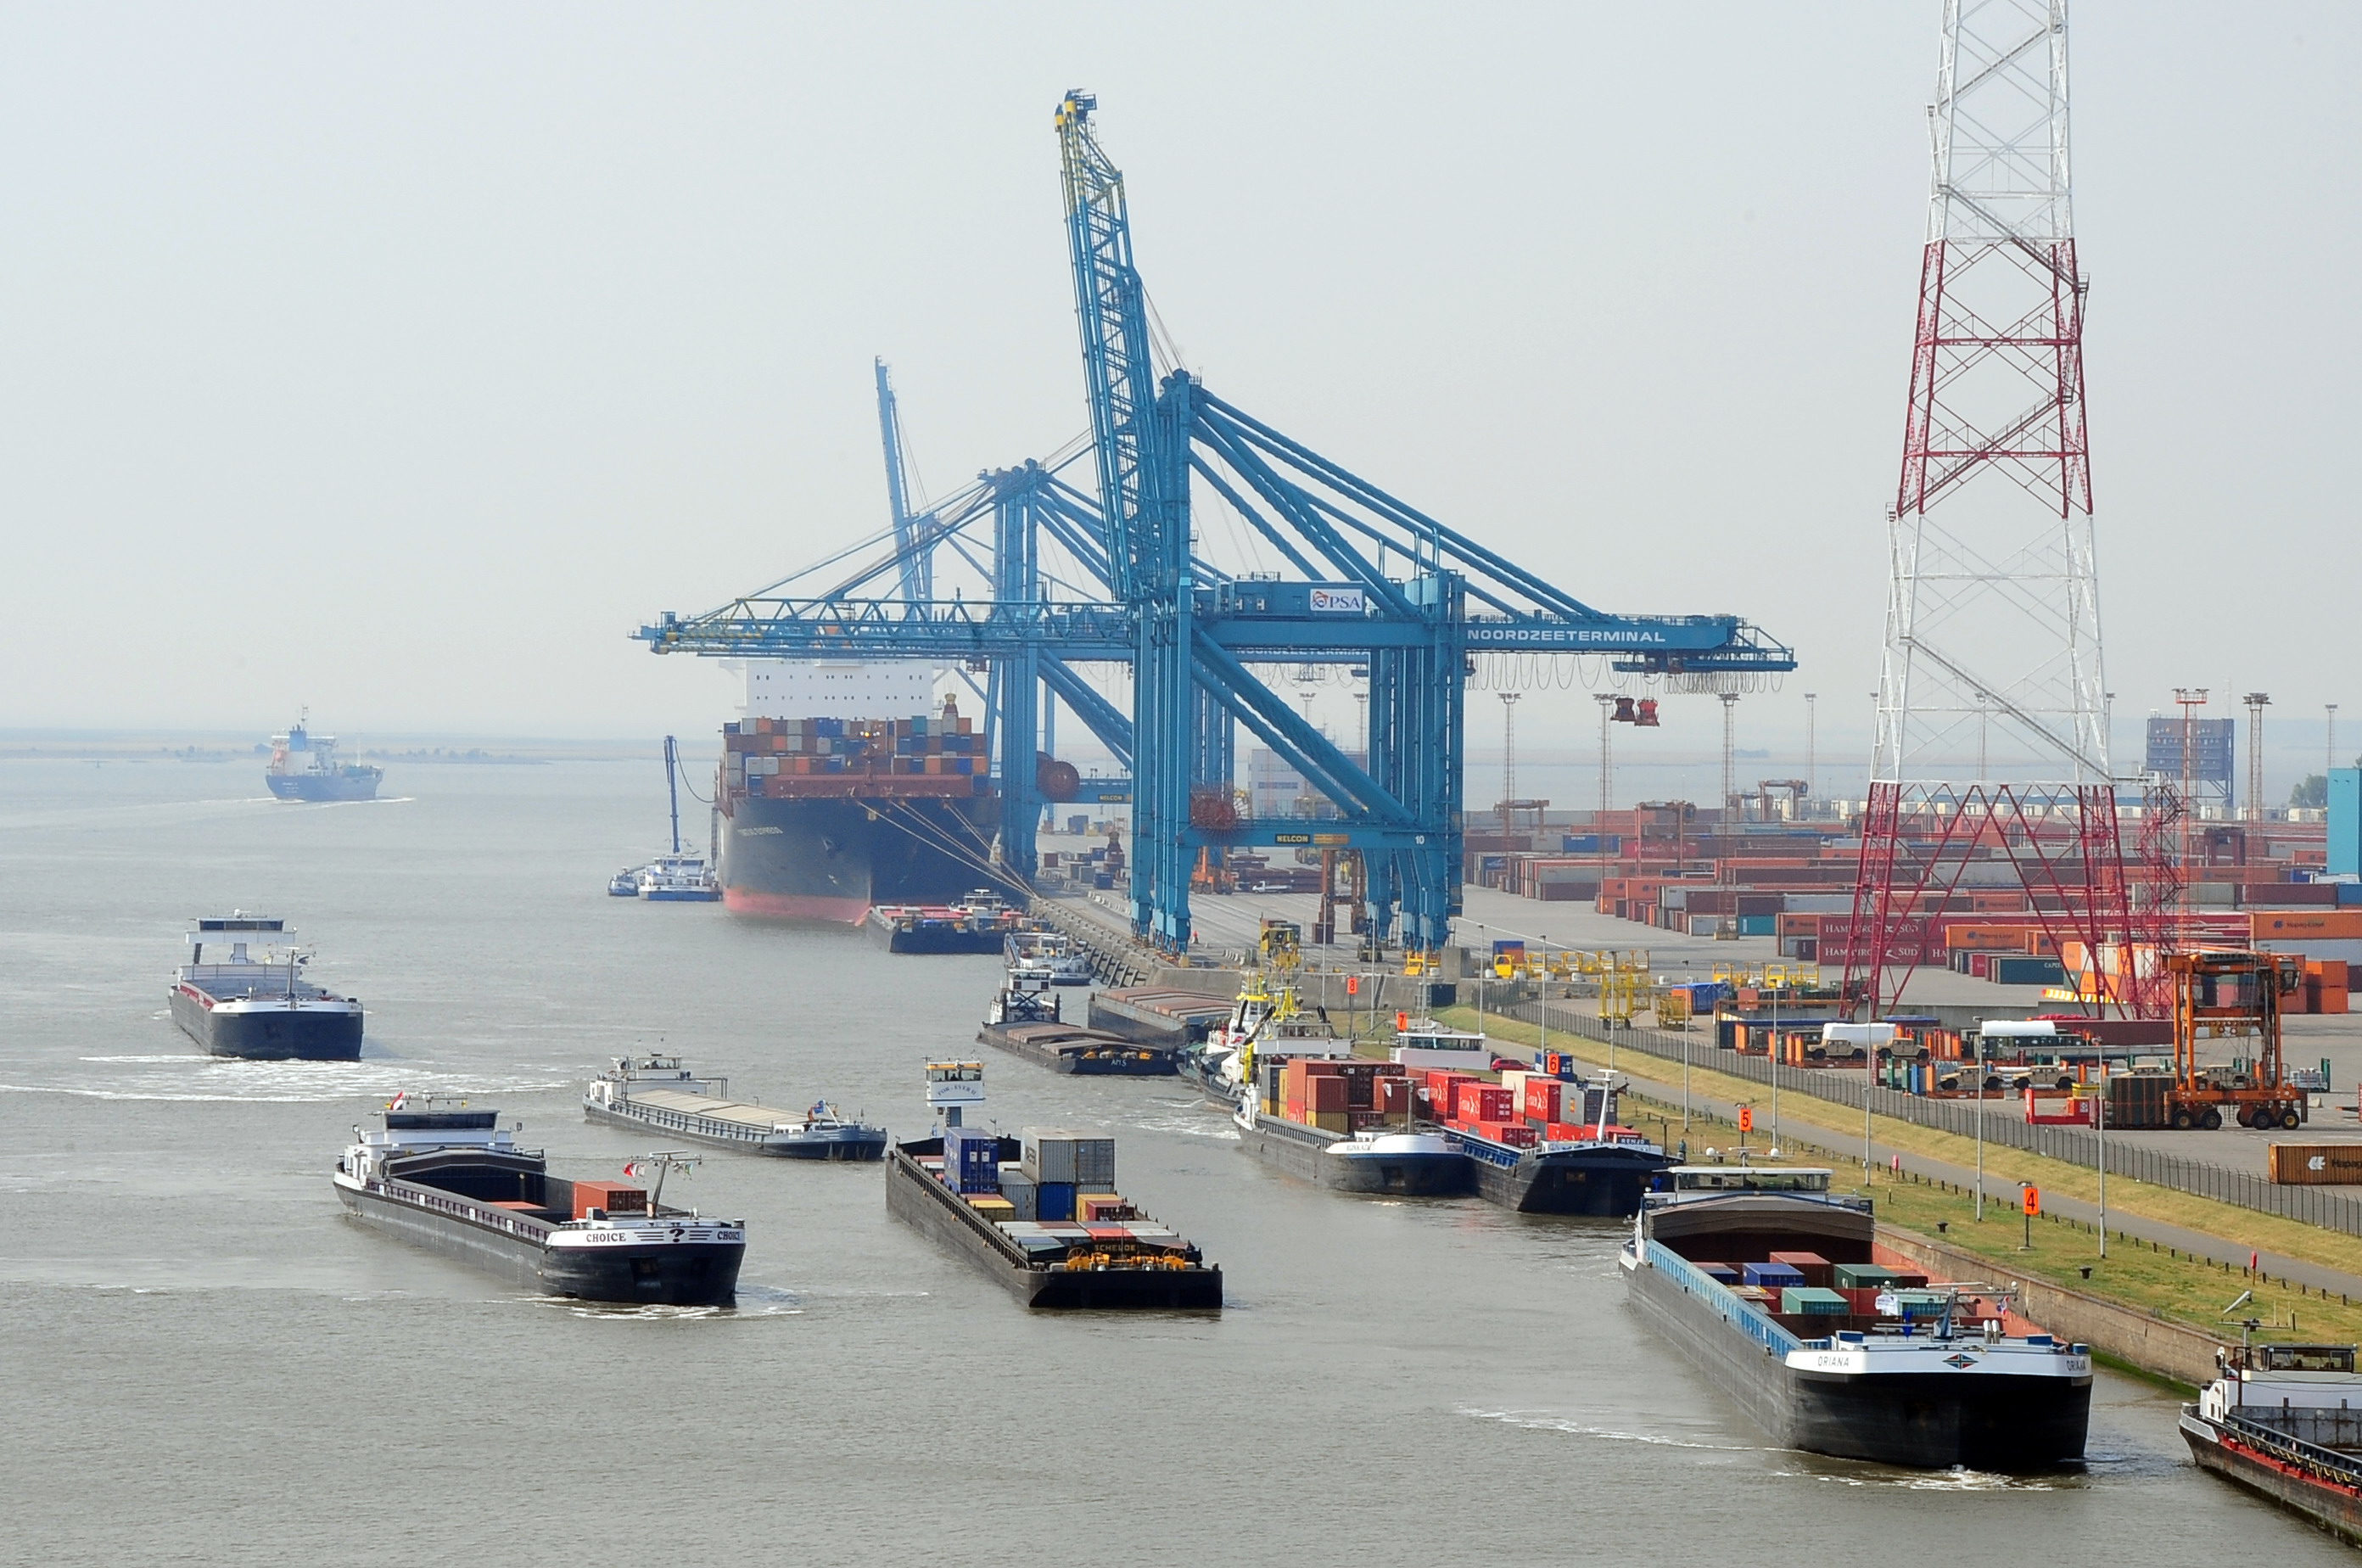 New service quay for barges in the port of Antwerp